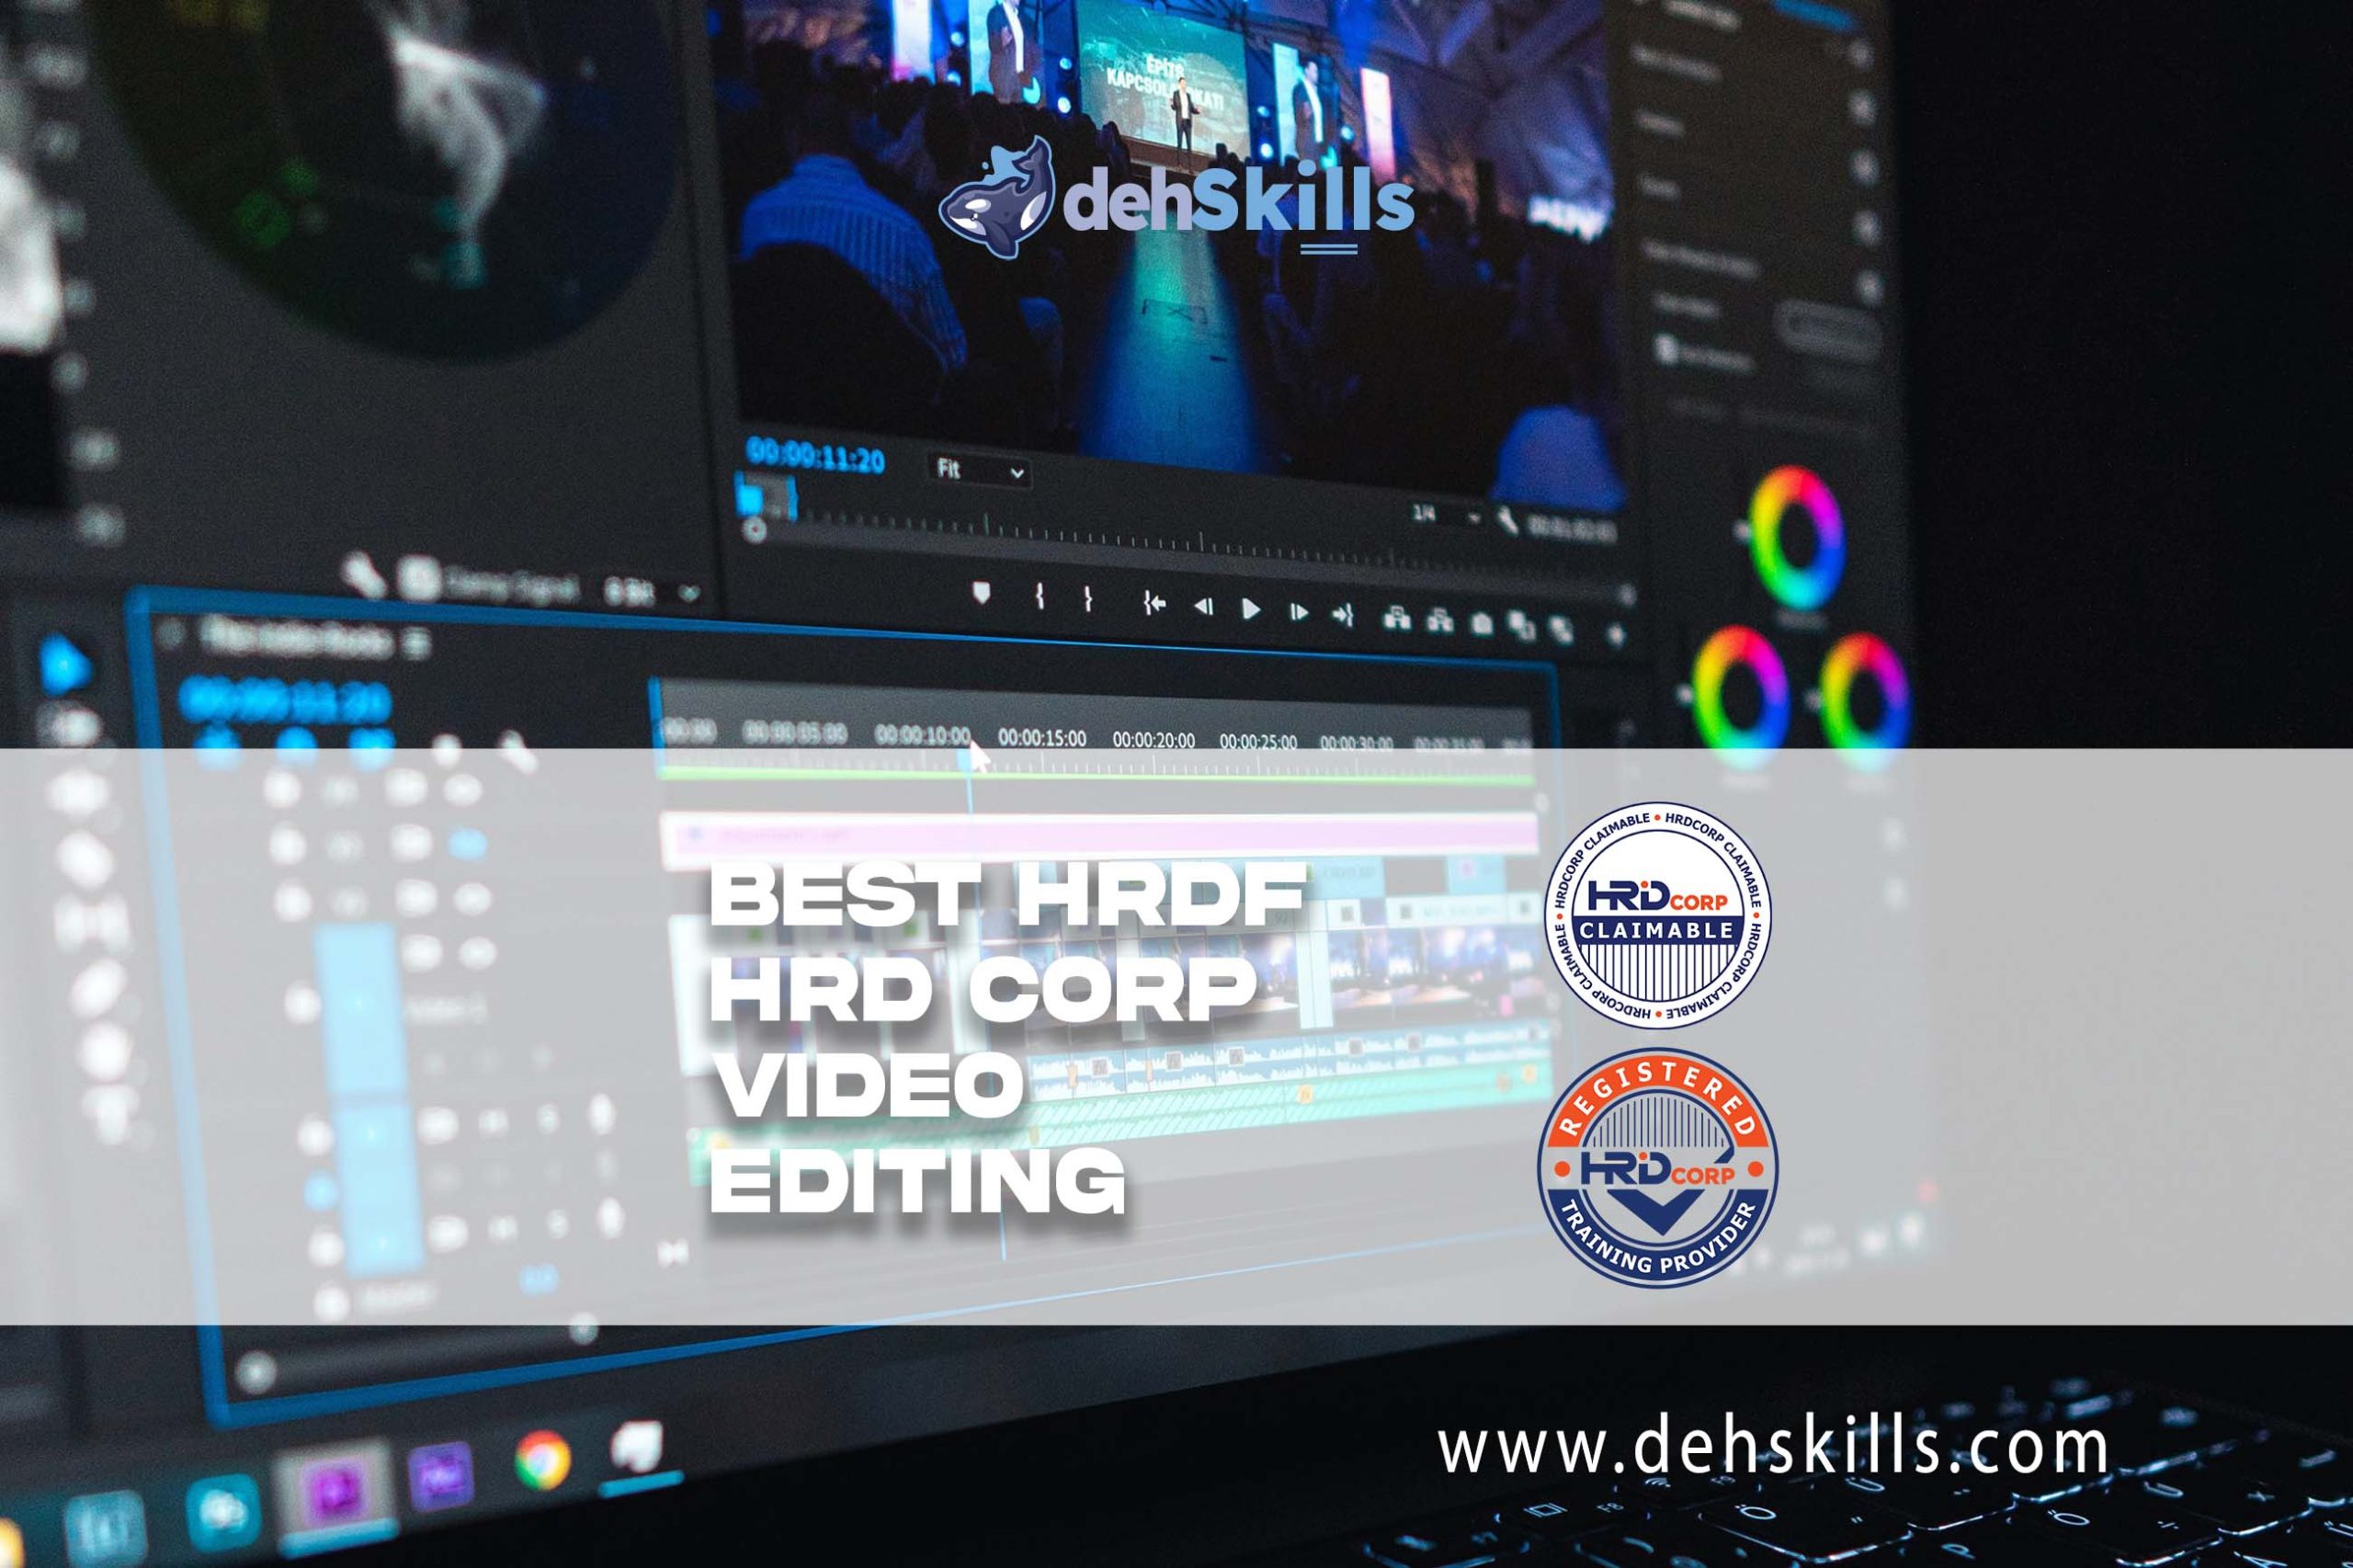 HRDF HRD Corp Claimable Video Editing Training